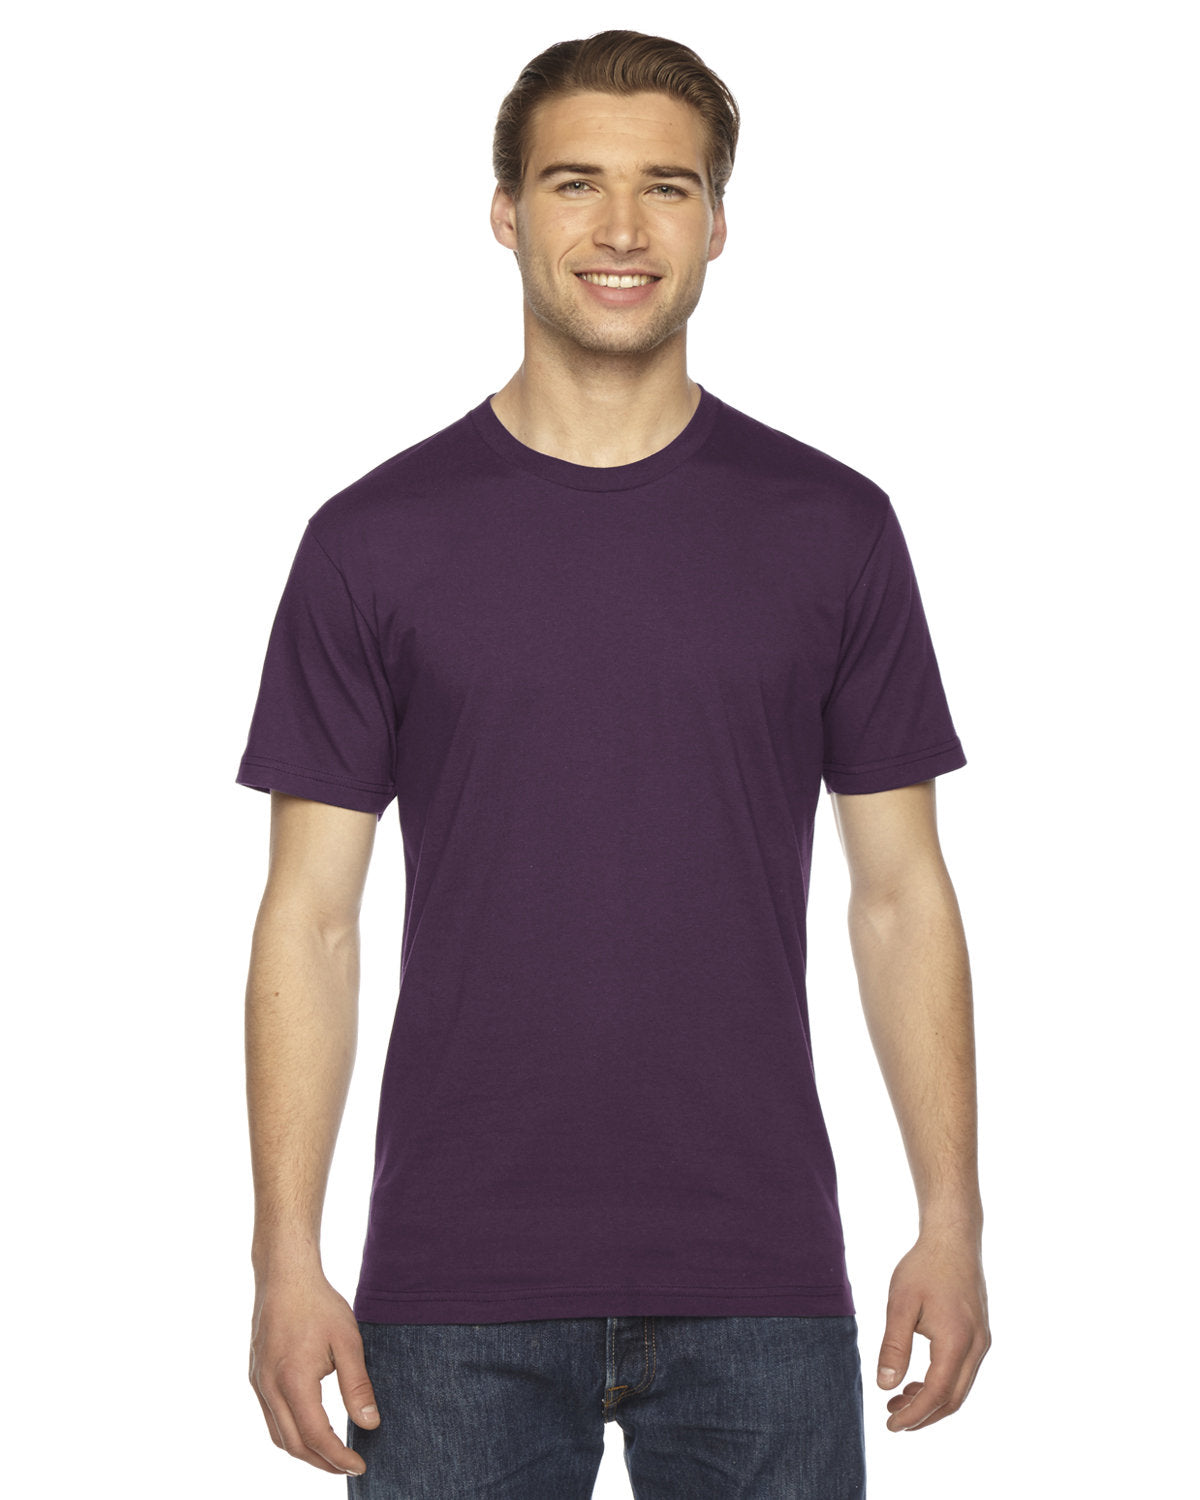 Adult T-Shirt - SoftTouch - Bely Premium Cotton